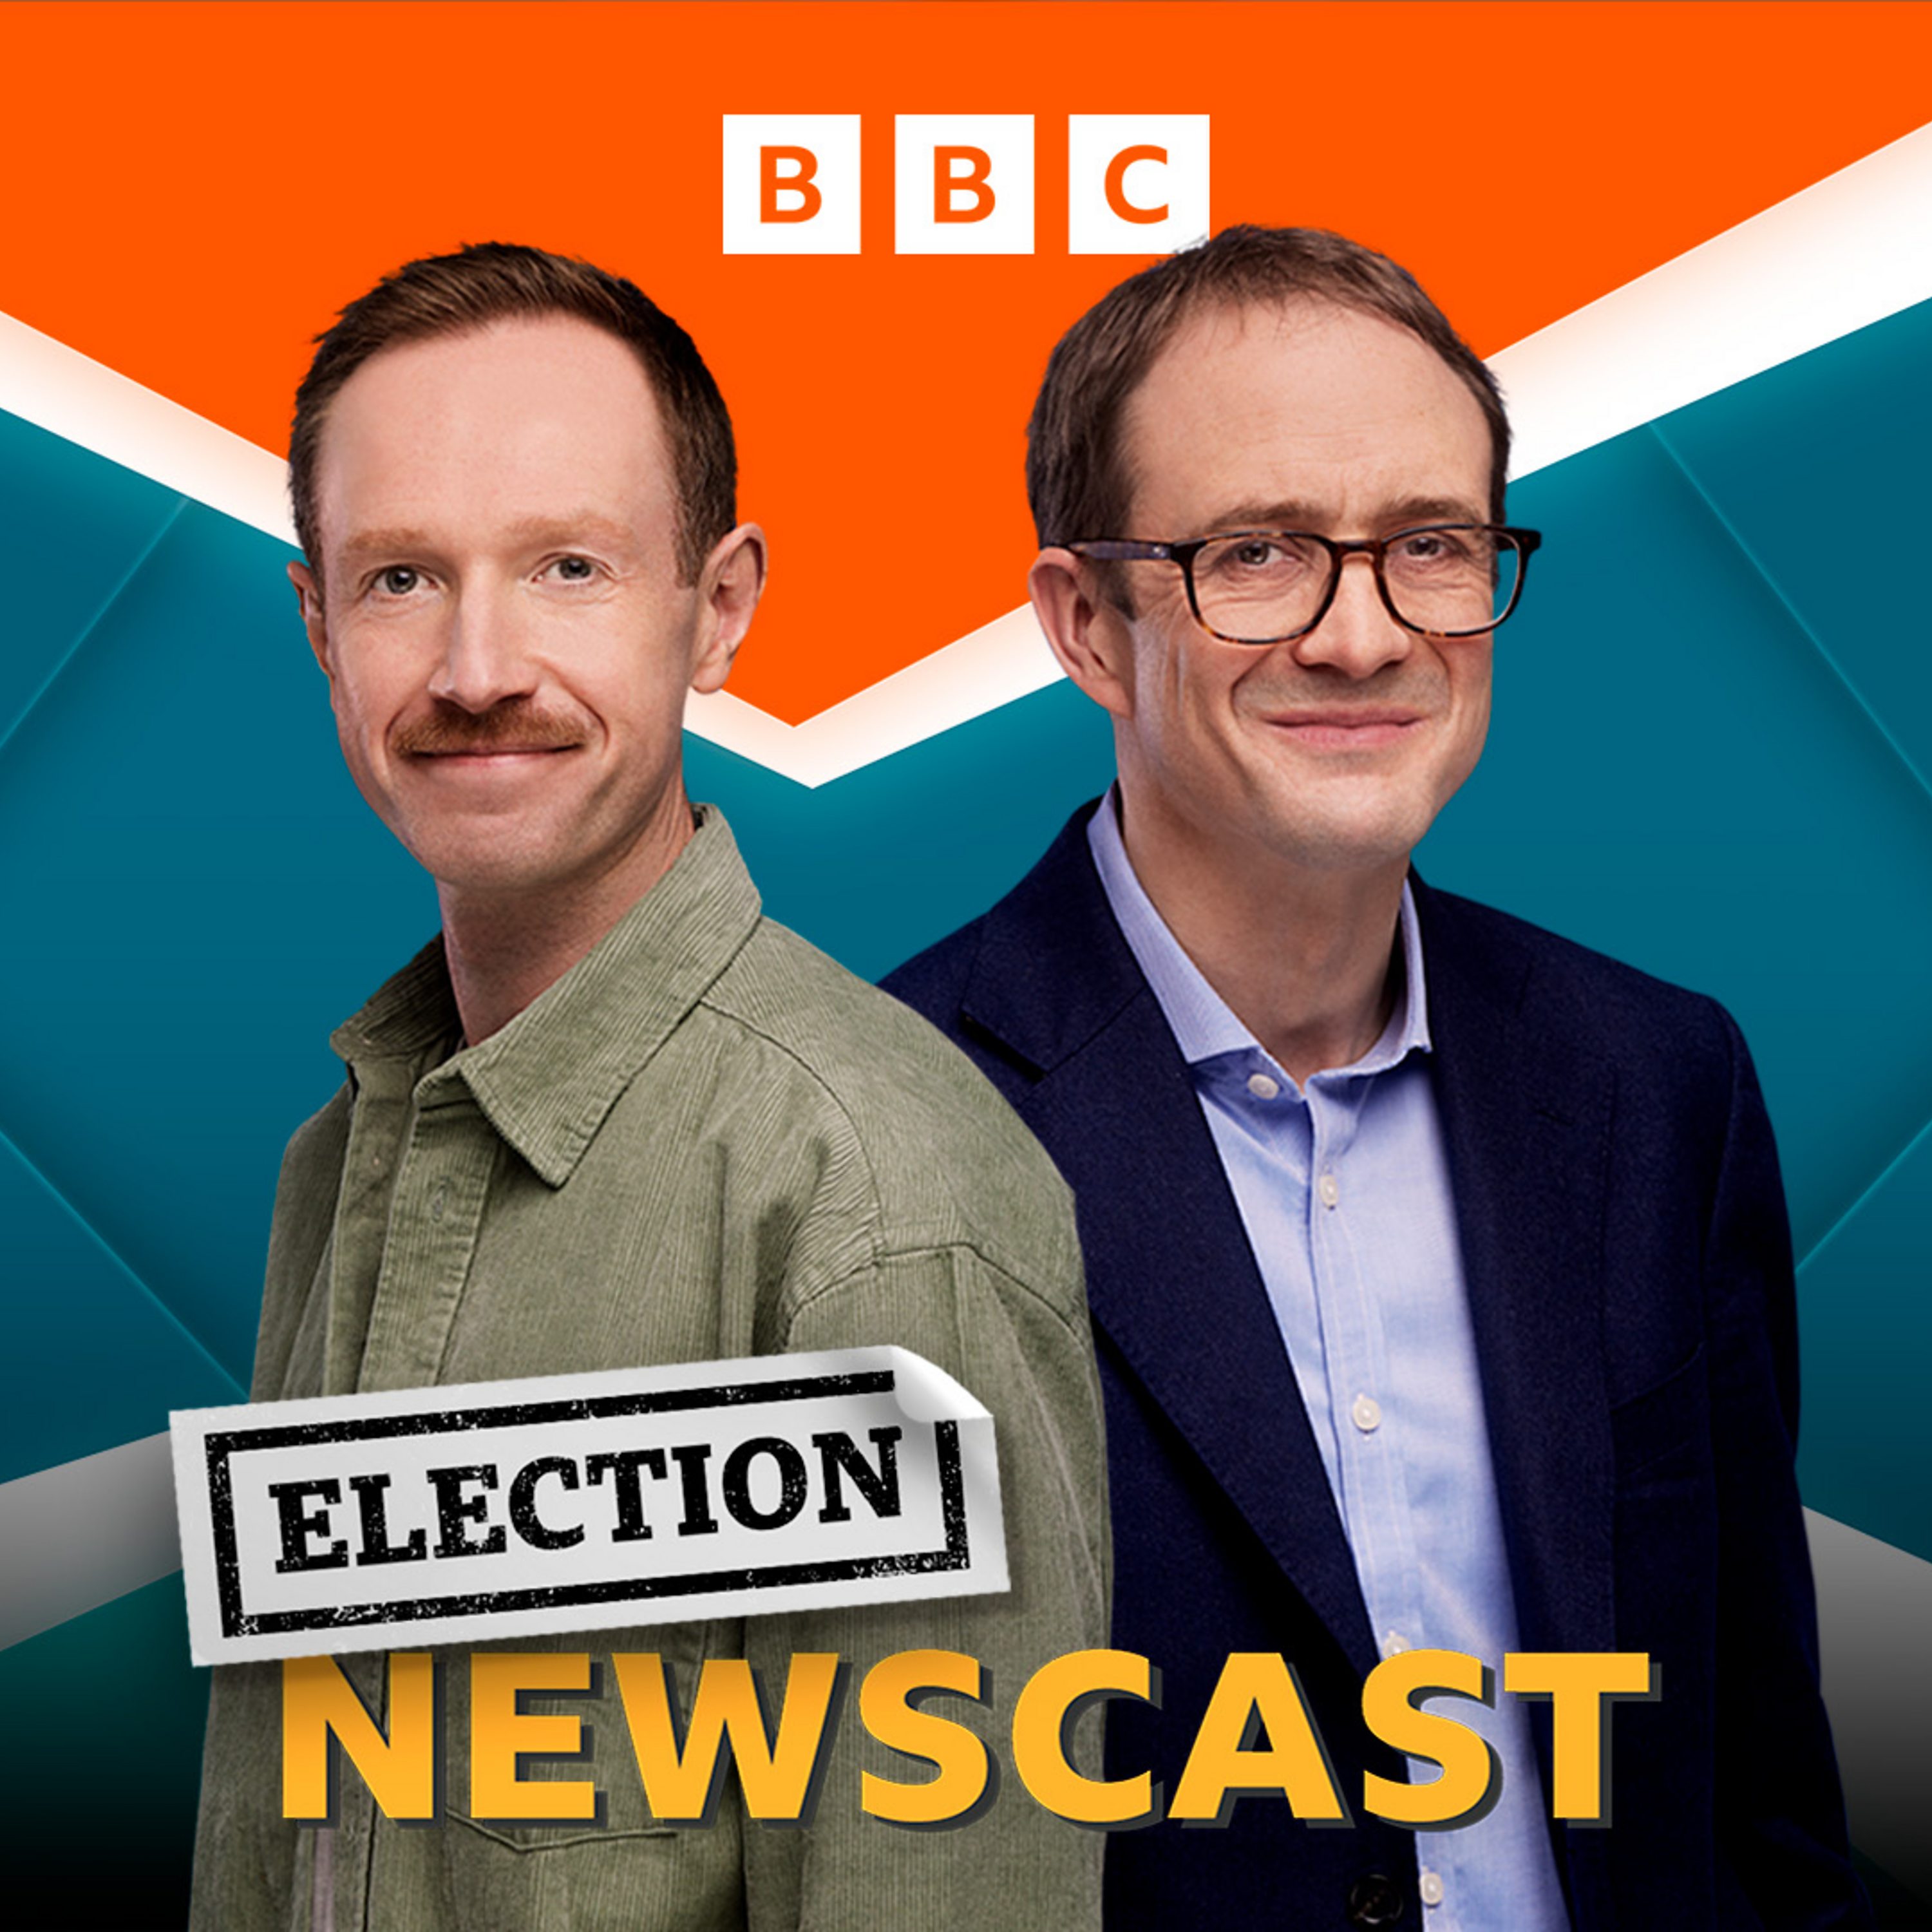 Electioncast: What’s Going On With Diane Abbott!?